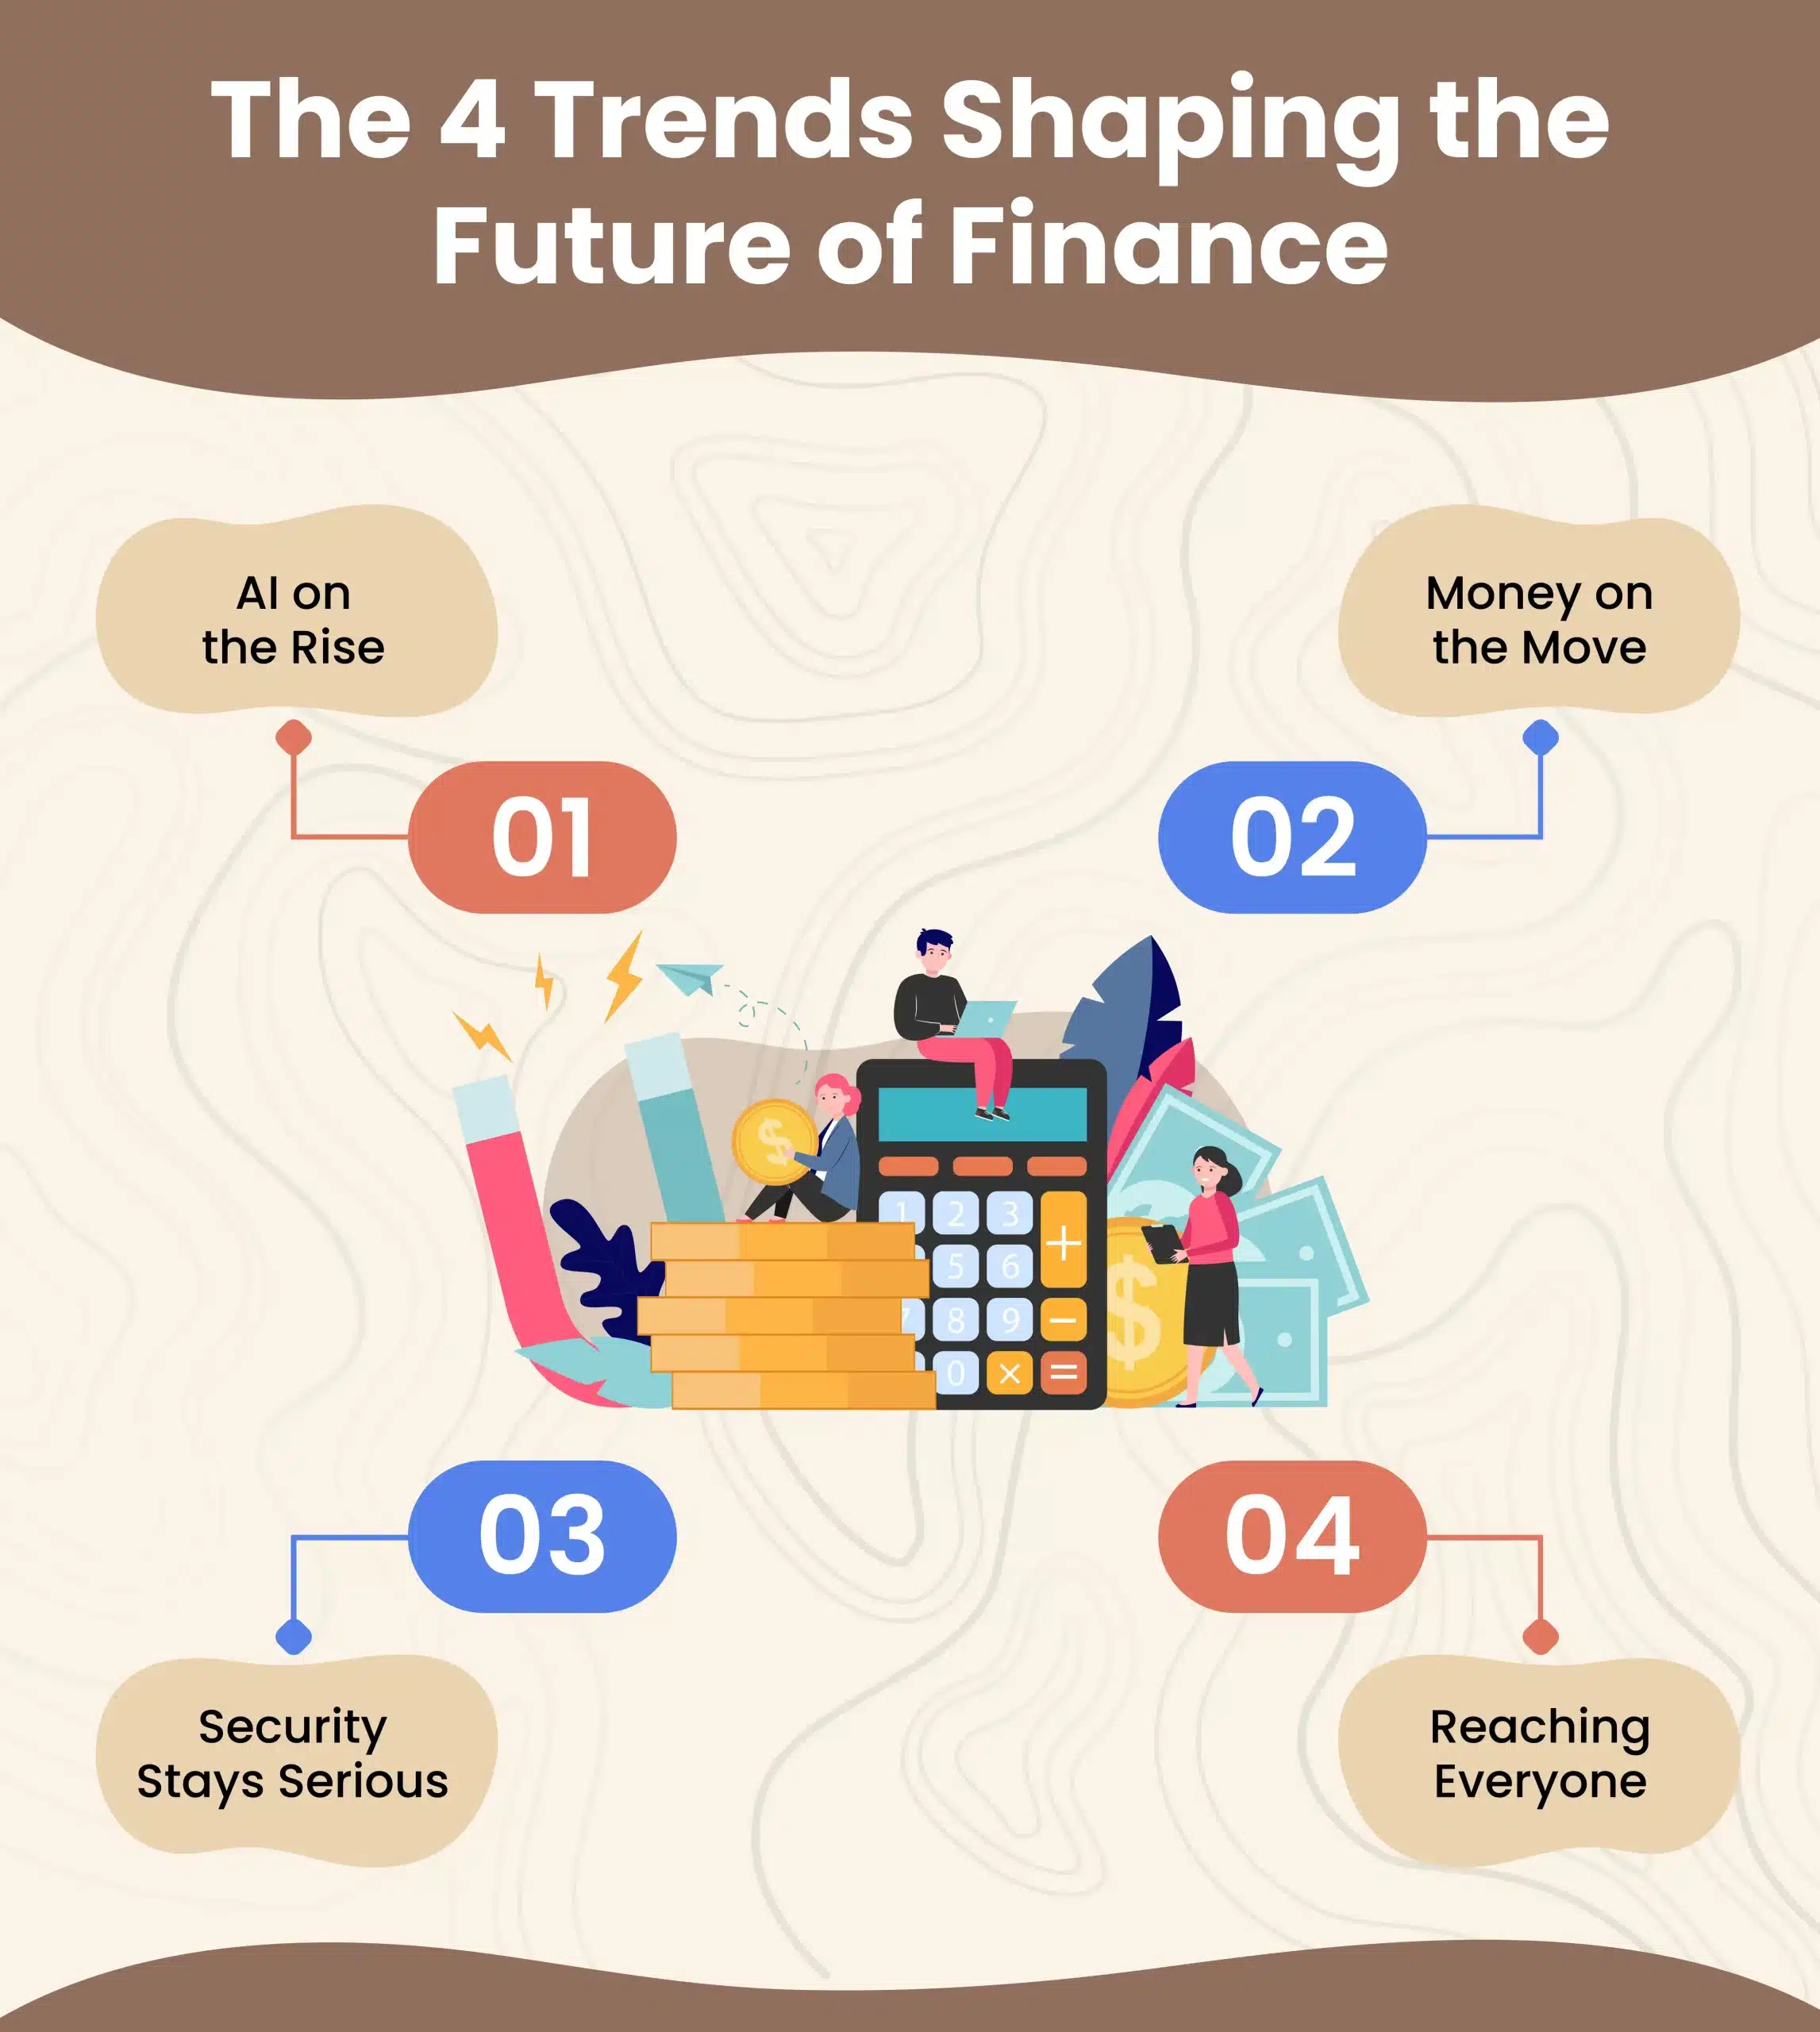 Trends Shaping the Future of Finance